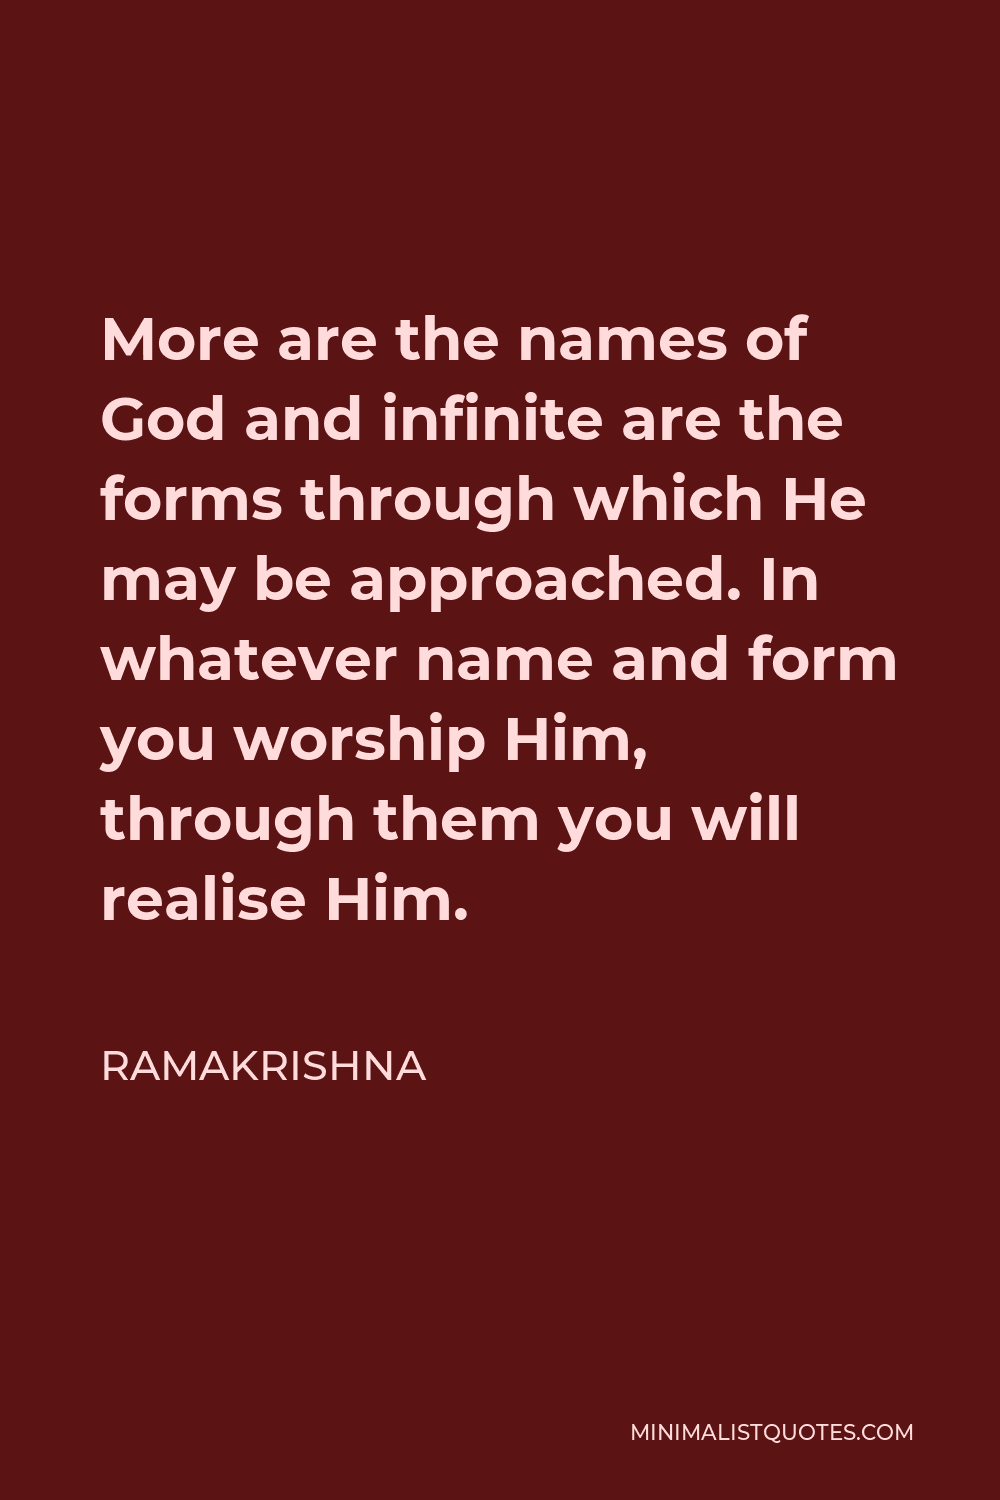 Ramakrishna Quote - More are the names of God and infinite are the forms through which He may be approached. In whatever name and form you worship Him, through them you will realise Him.